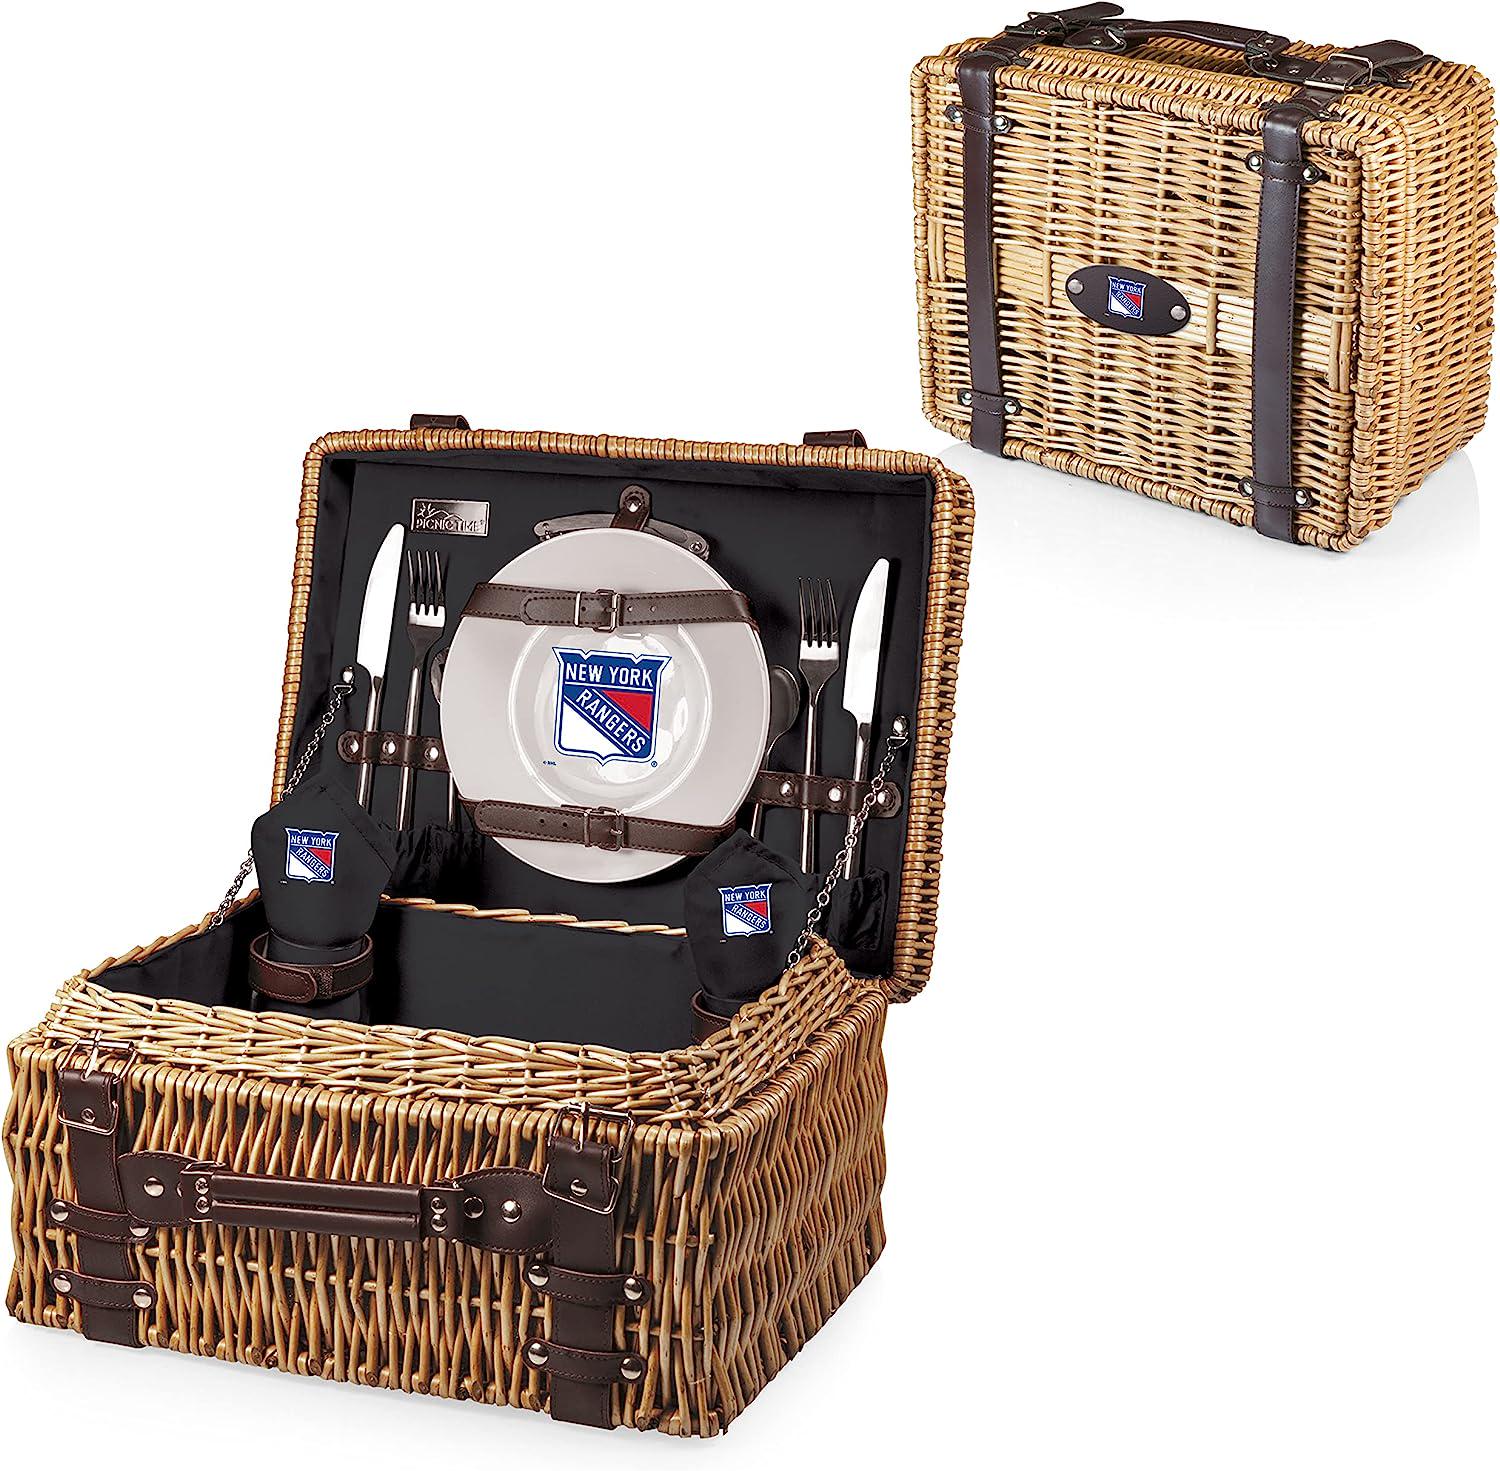 PICNIC TIME NHL Unisex-Adult NHL Champion Picnic Basket for 2, Large Wicker Picnic Set with Cutlery Service Kit-